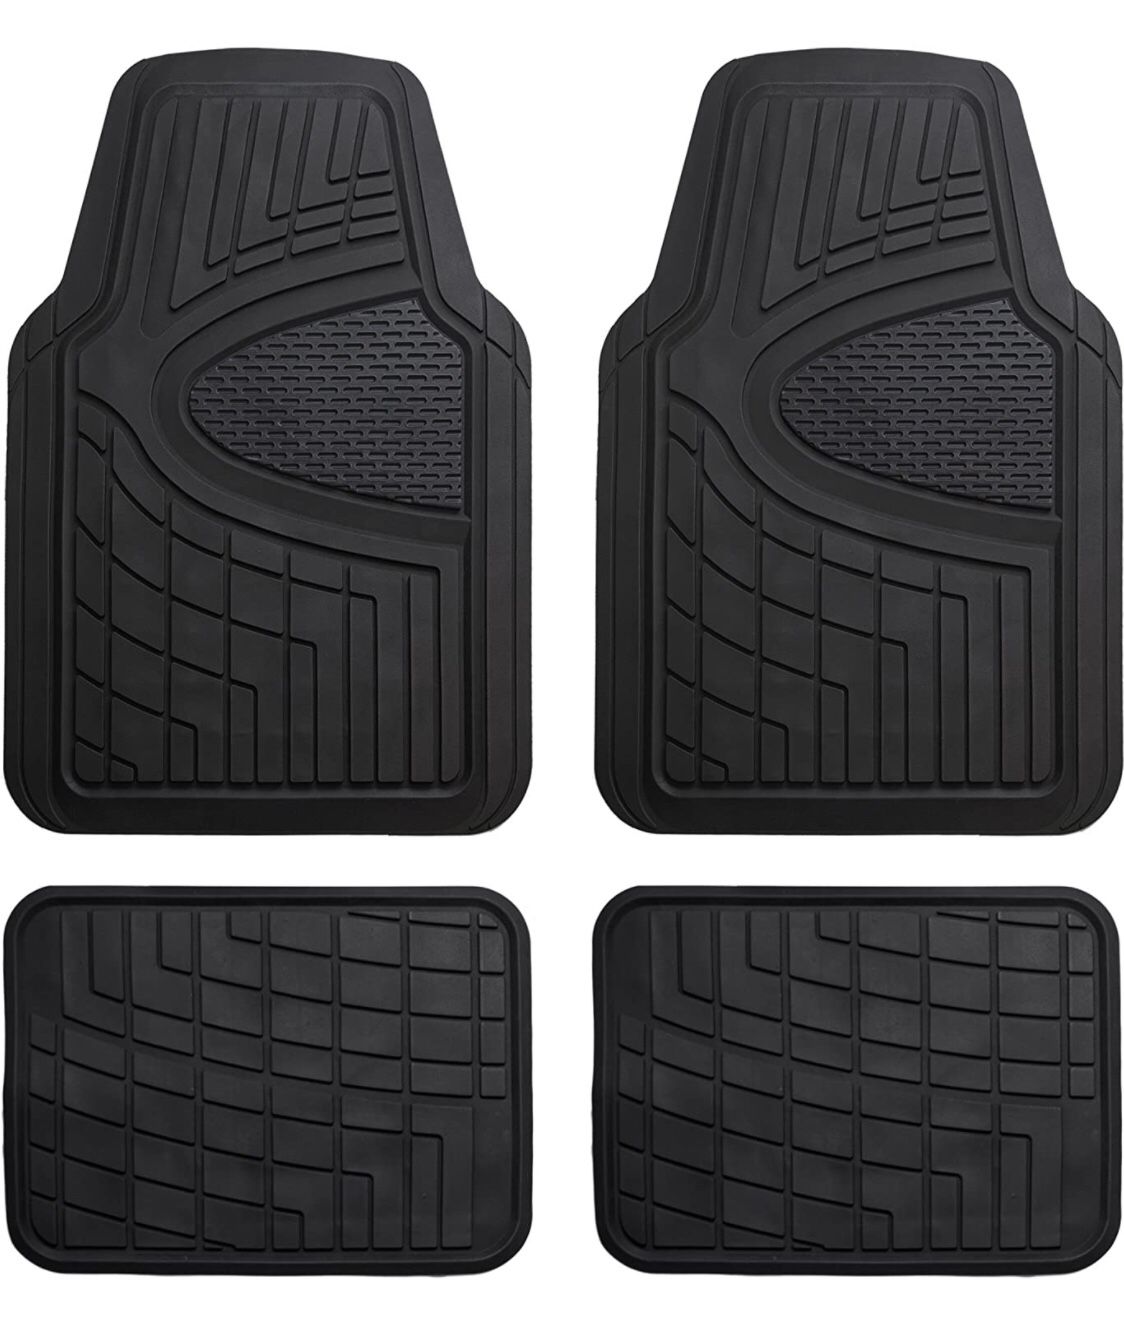 FH Group Automotive Floor Mats - Heavy-Duty Rubber Floor Mats for Cars, Universal Fit Full Set, Climaproof Floor Mats, Trimmable Floor Mats for Most S